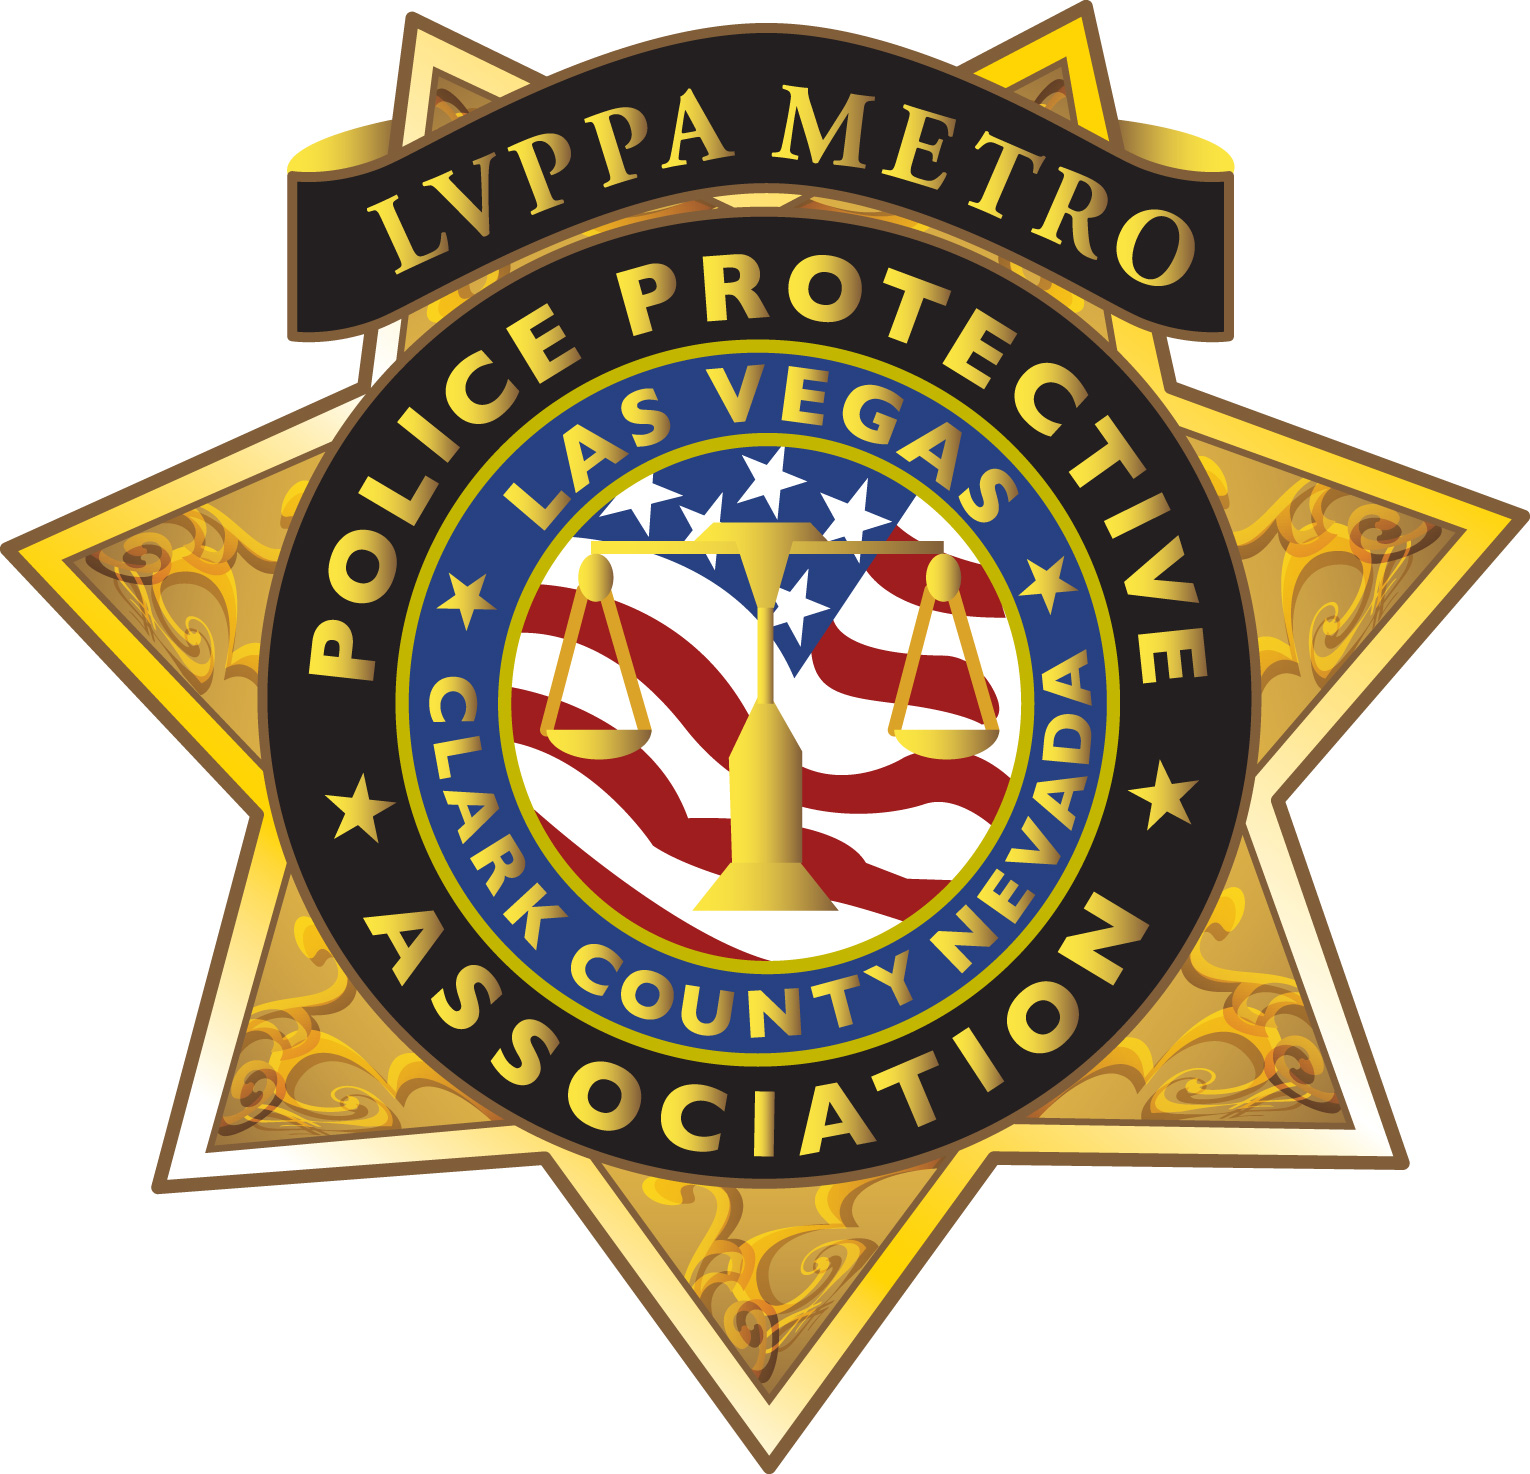 It’s an Honor - Las Vegas Police Protective Association